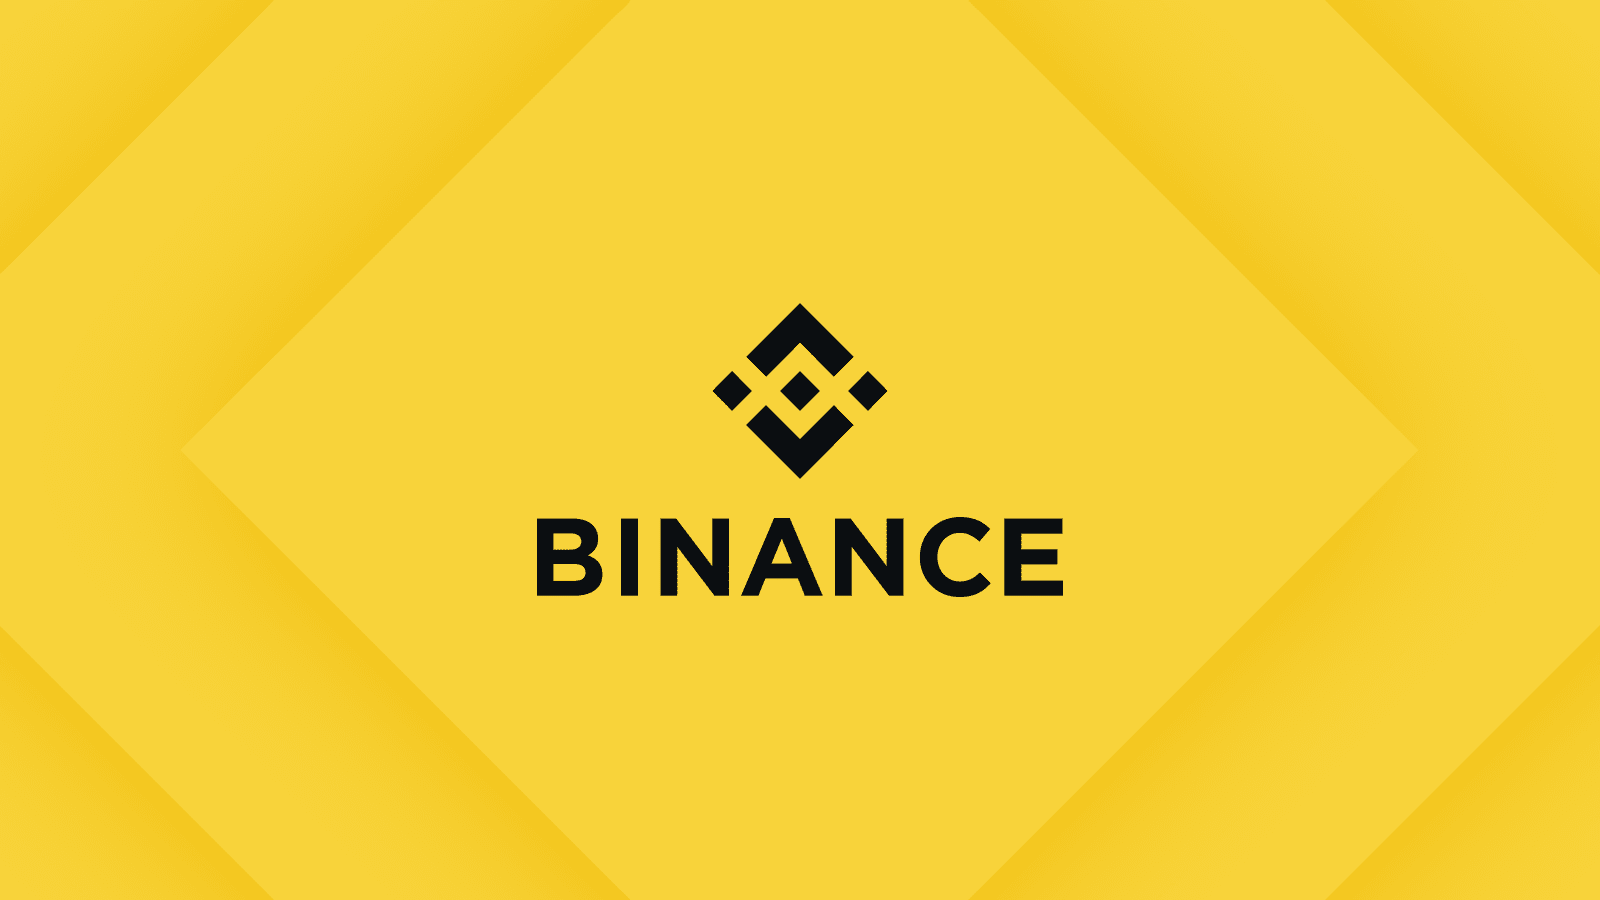 No marketing? No matter, as Binance's straight laced approached to operations has seem them build trust in the crypto space.